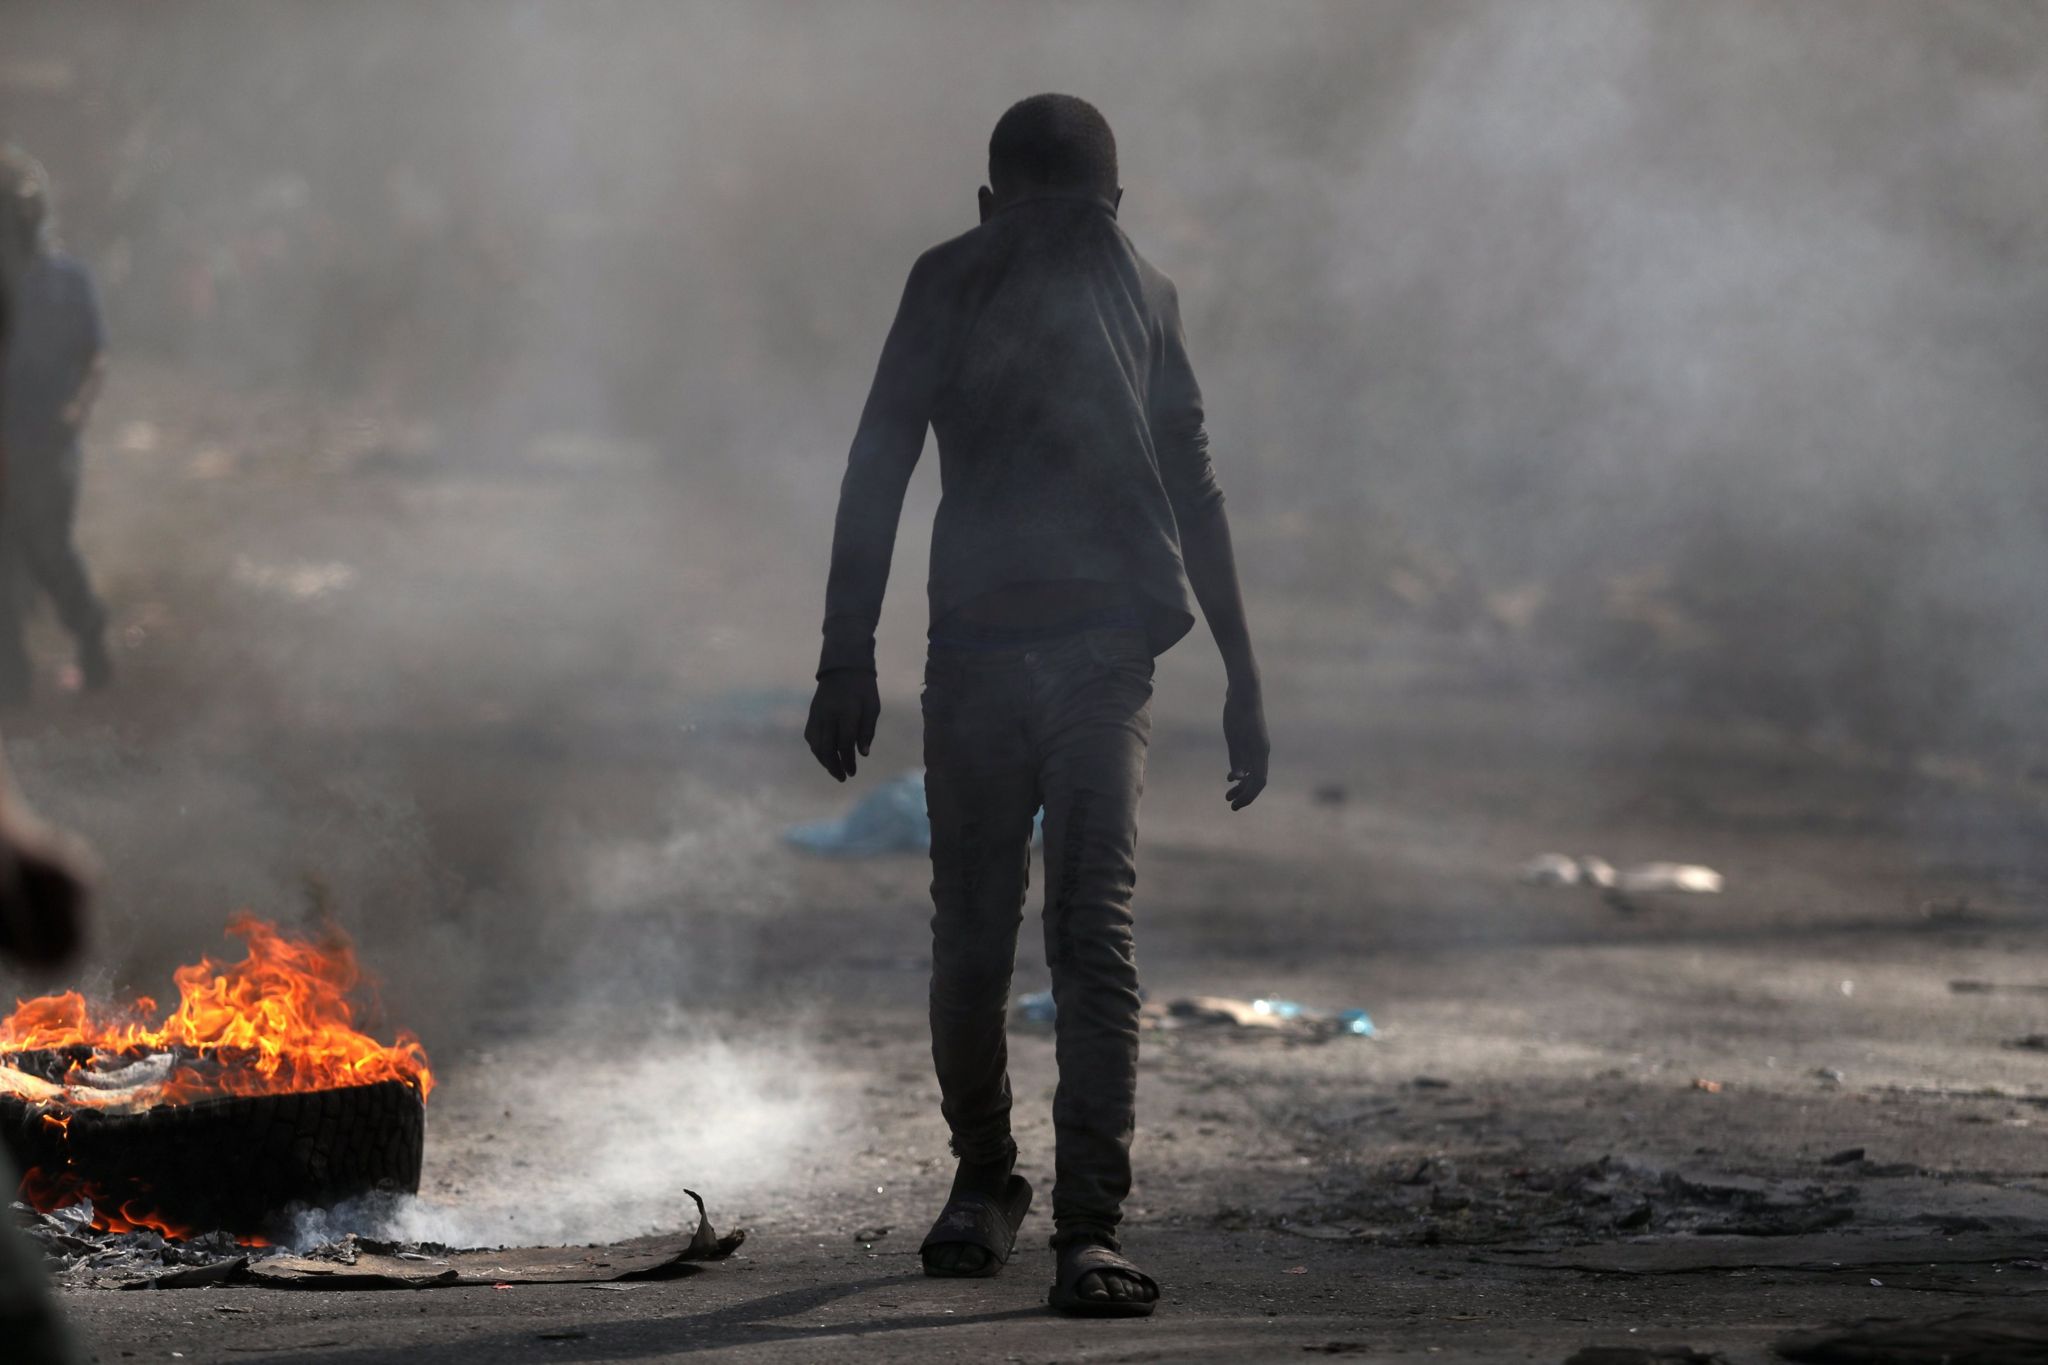 A child covers his face as he walks past a burning barricade during anti-government protests in Port-au-Prince